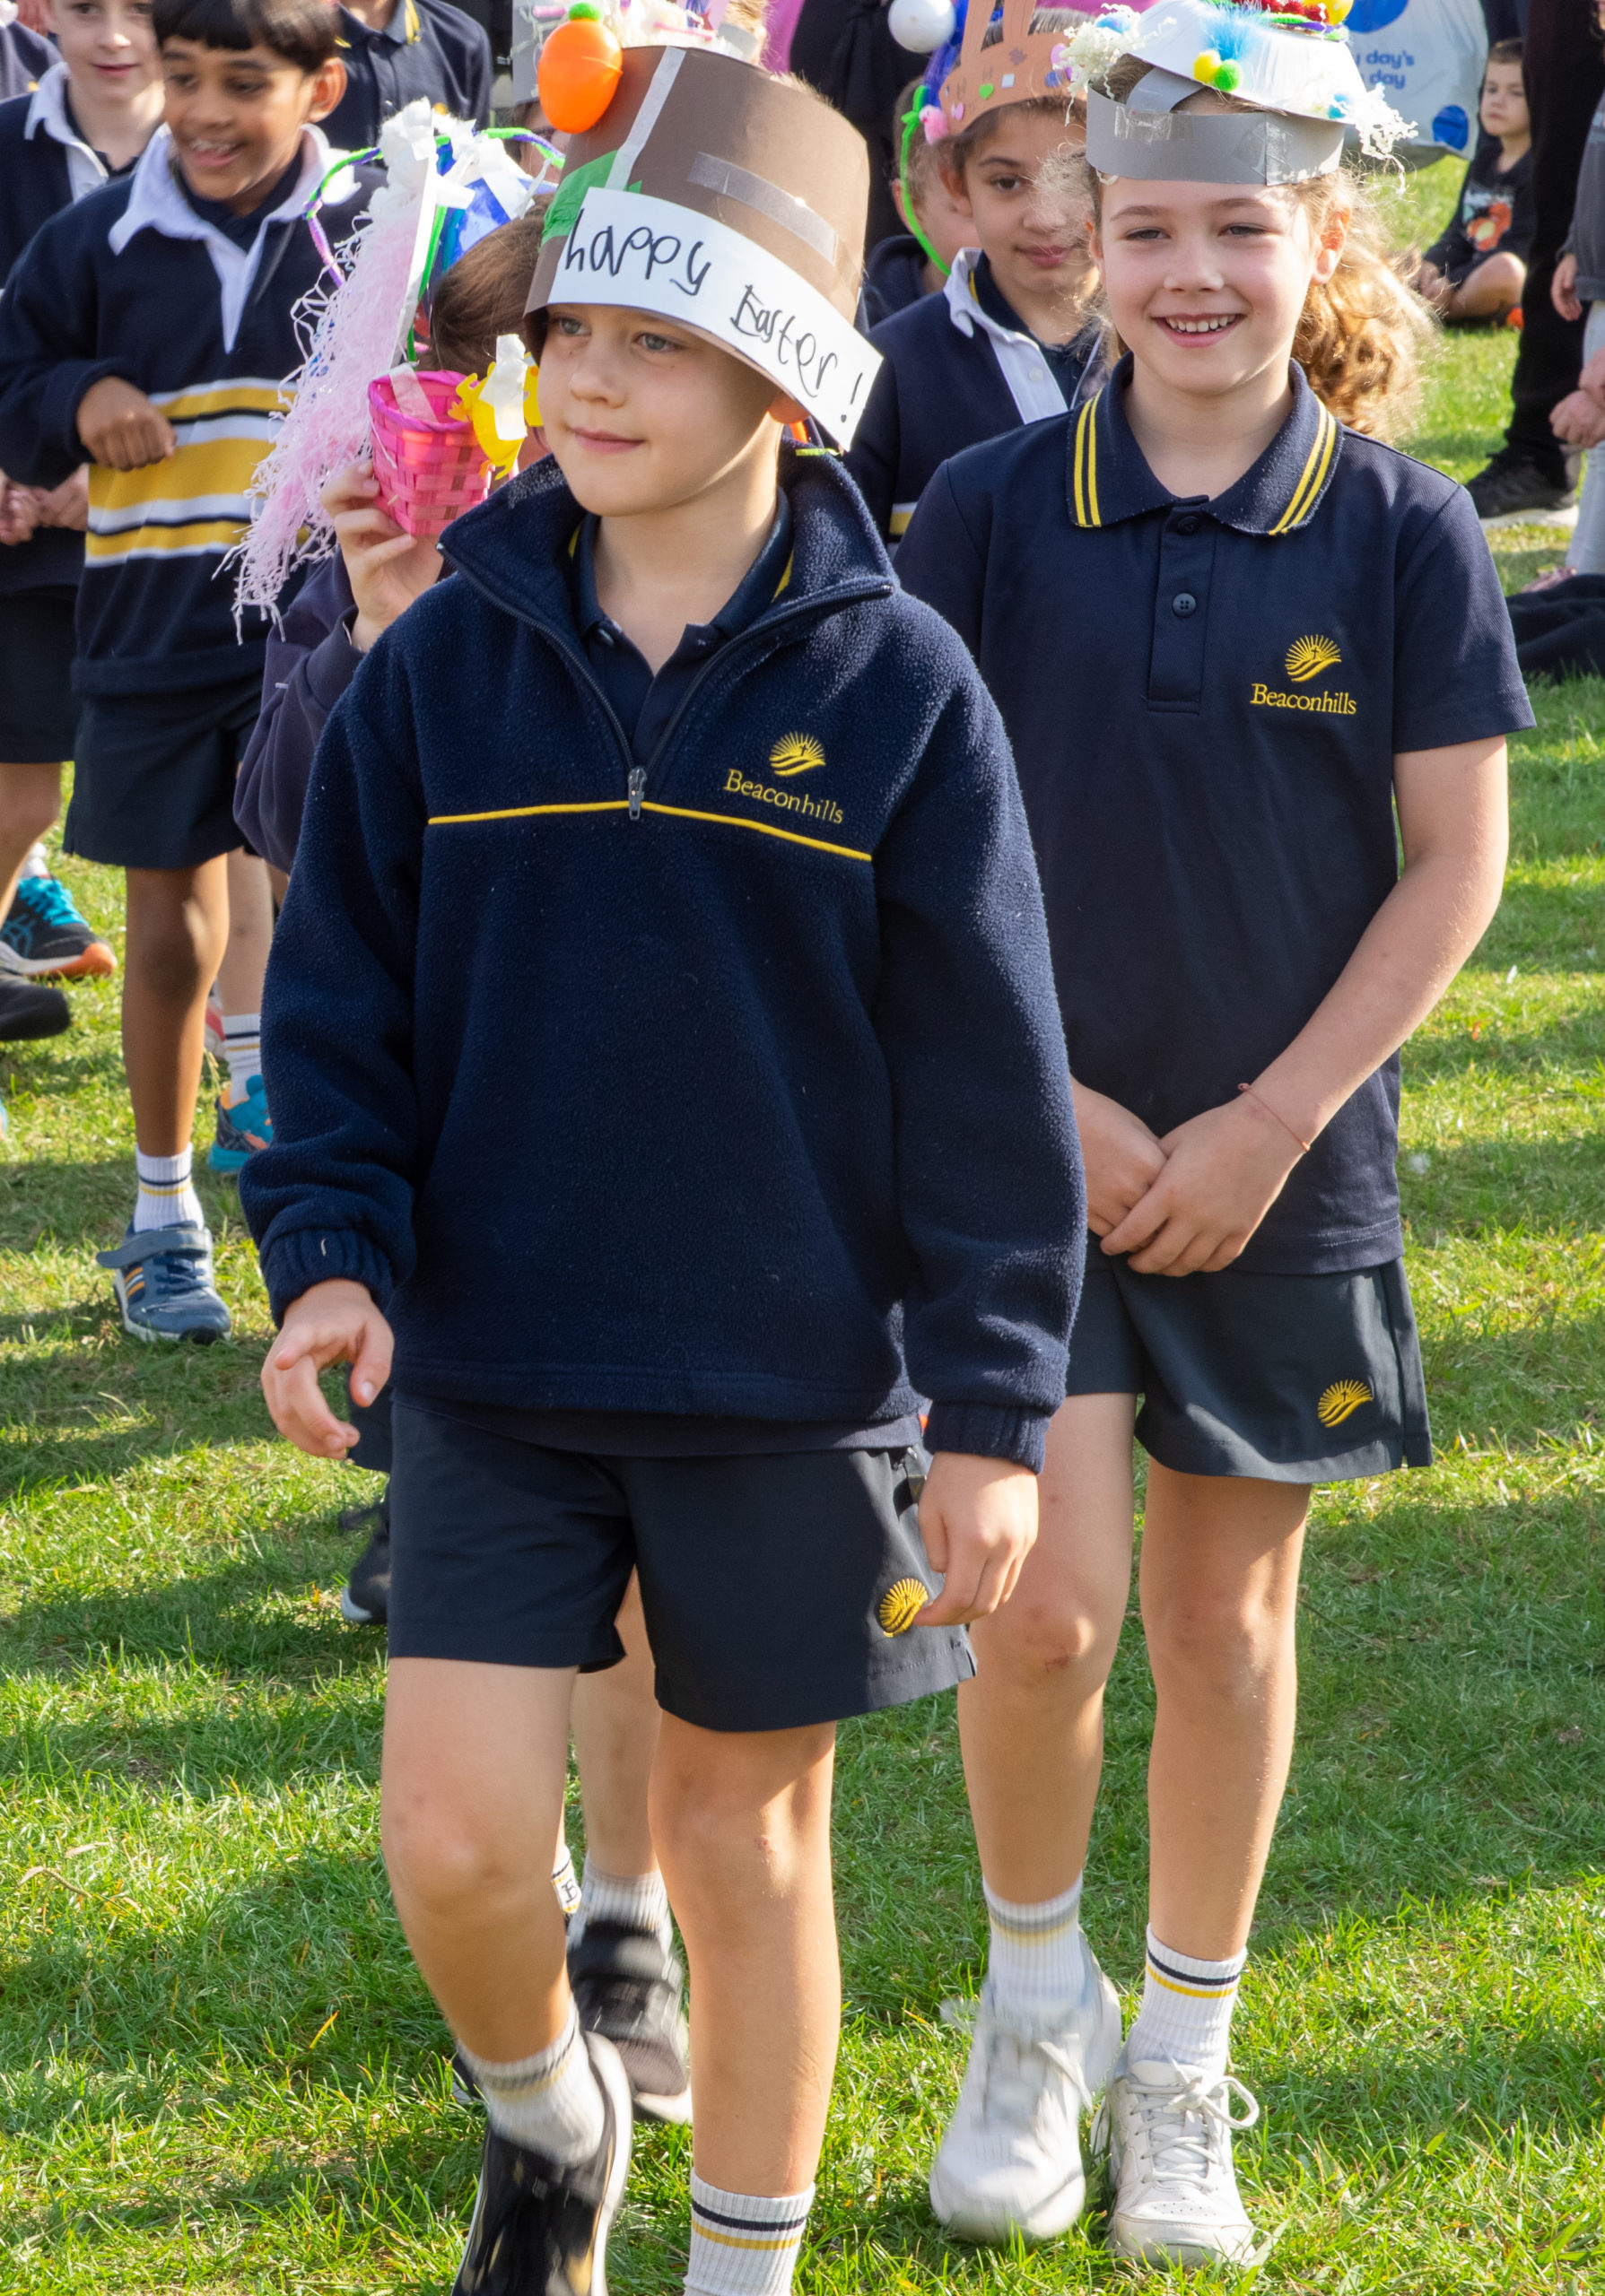 Beaconhills Pakenham students parading with their Easter hats.